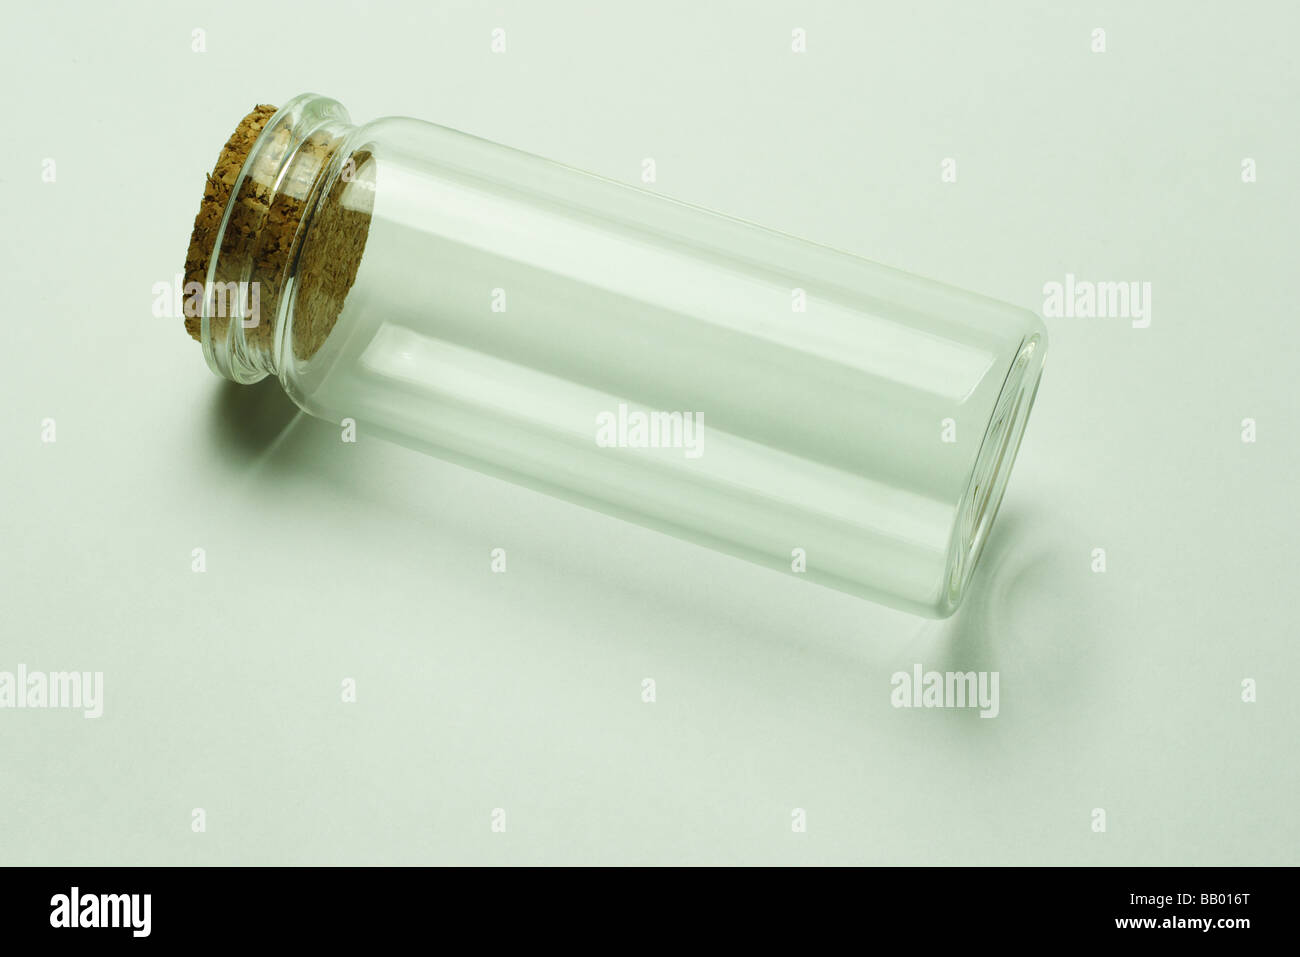 Empty glass container with cork stopper on seamless background Stock Photo